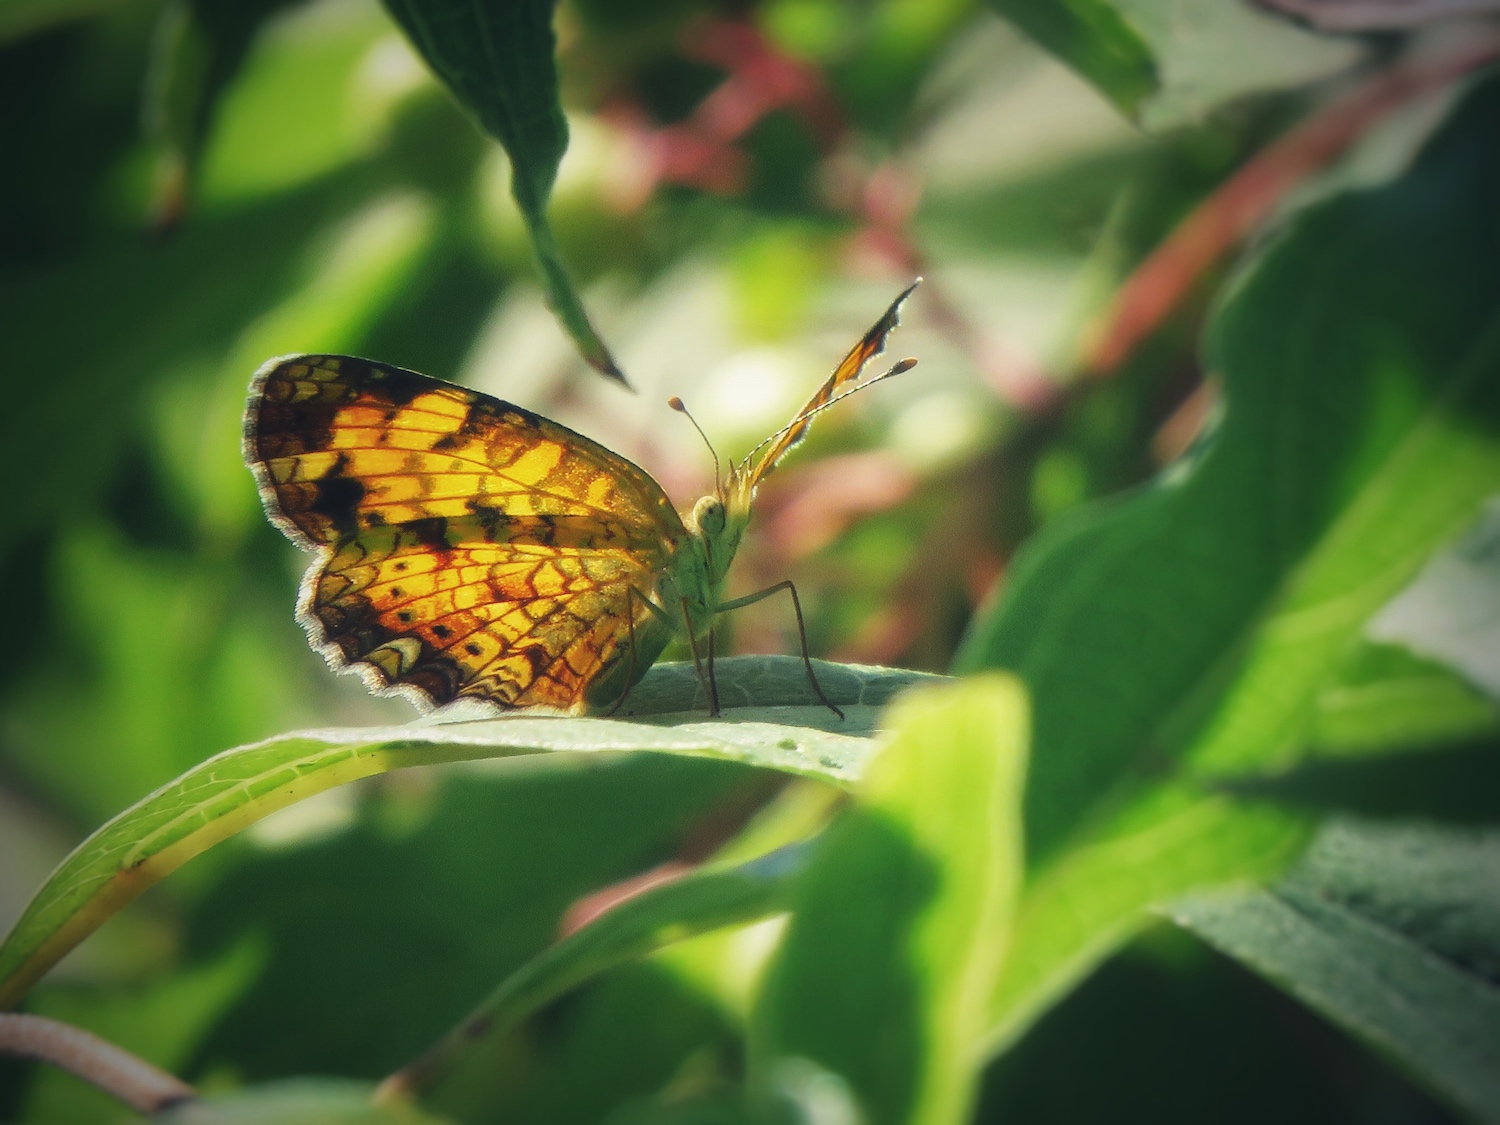 A butterfly on a green leaf